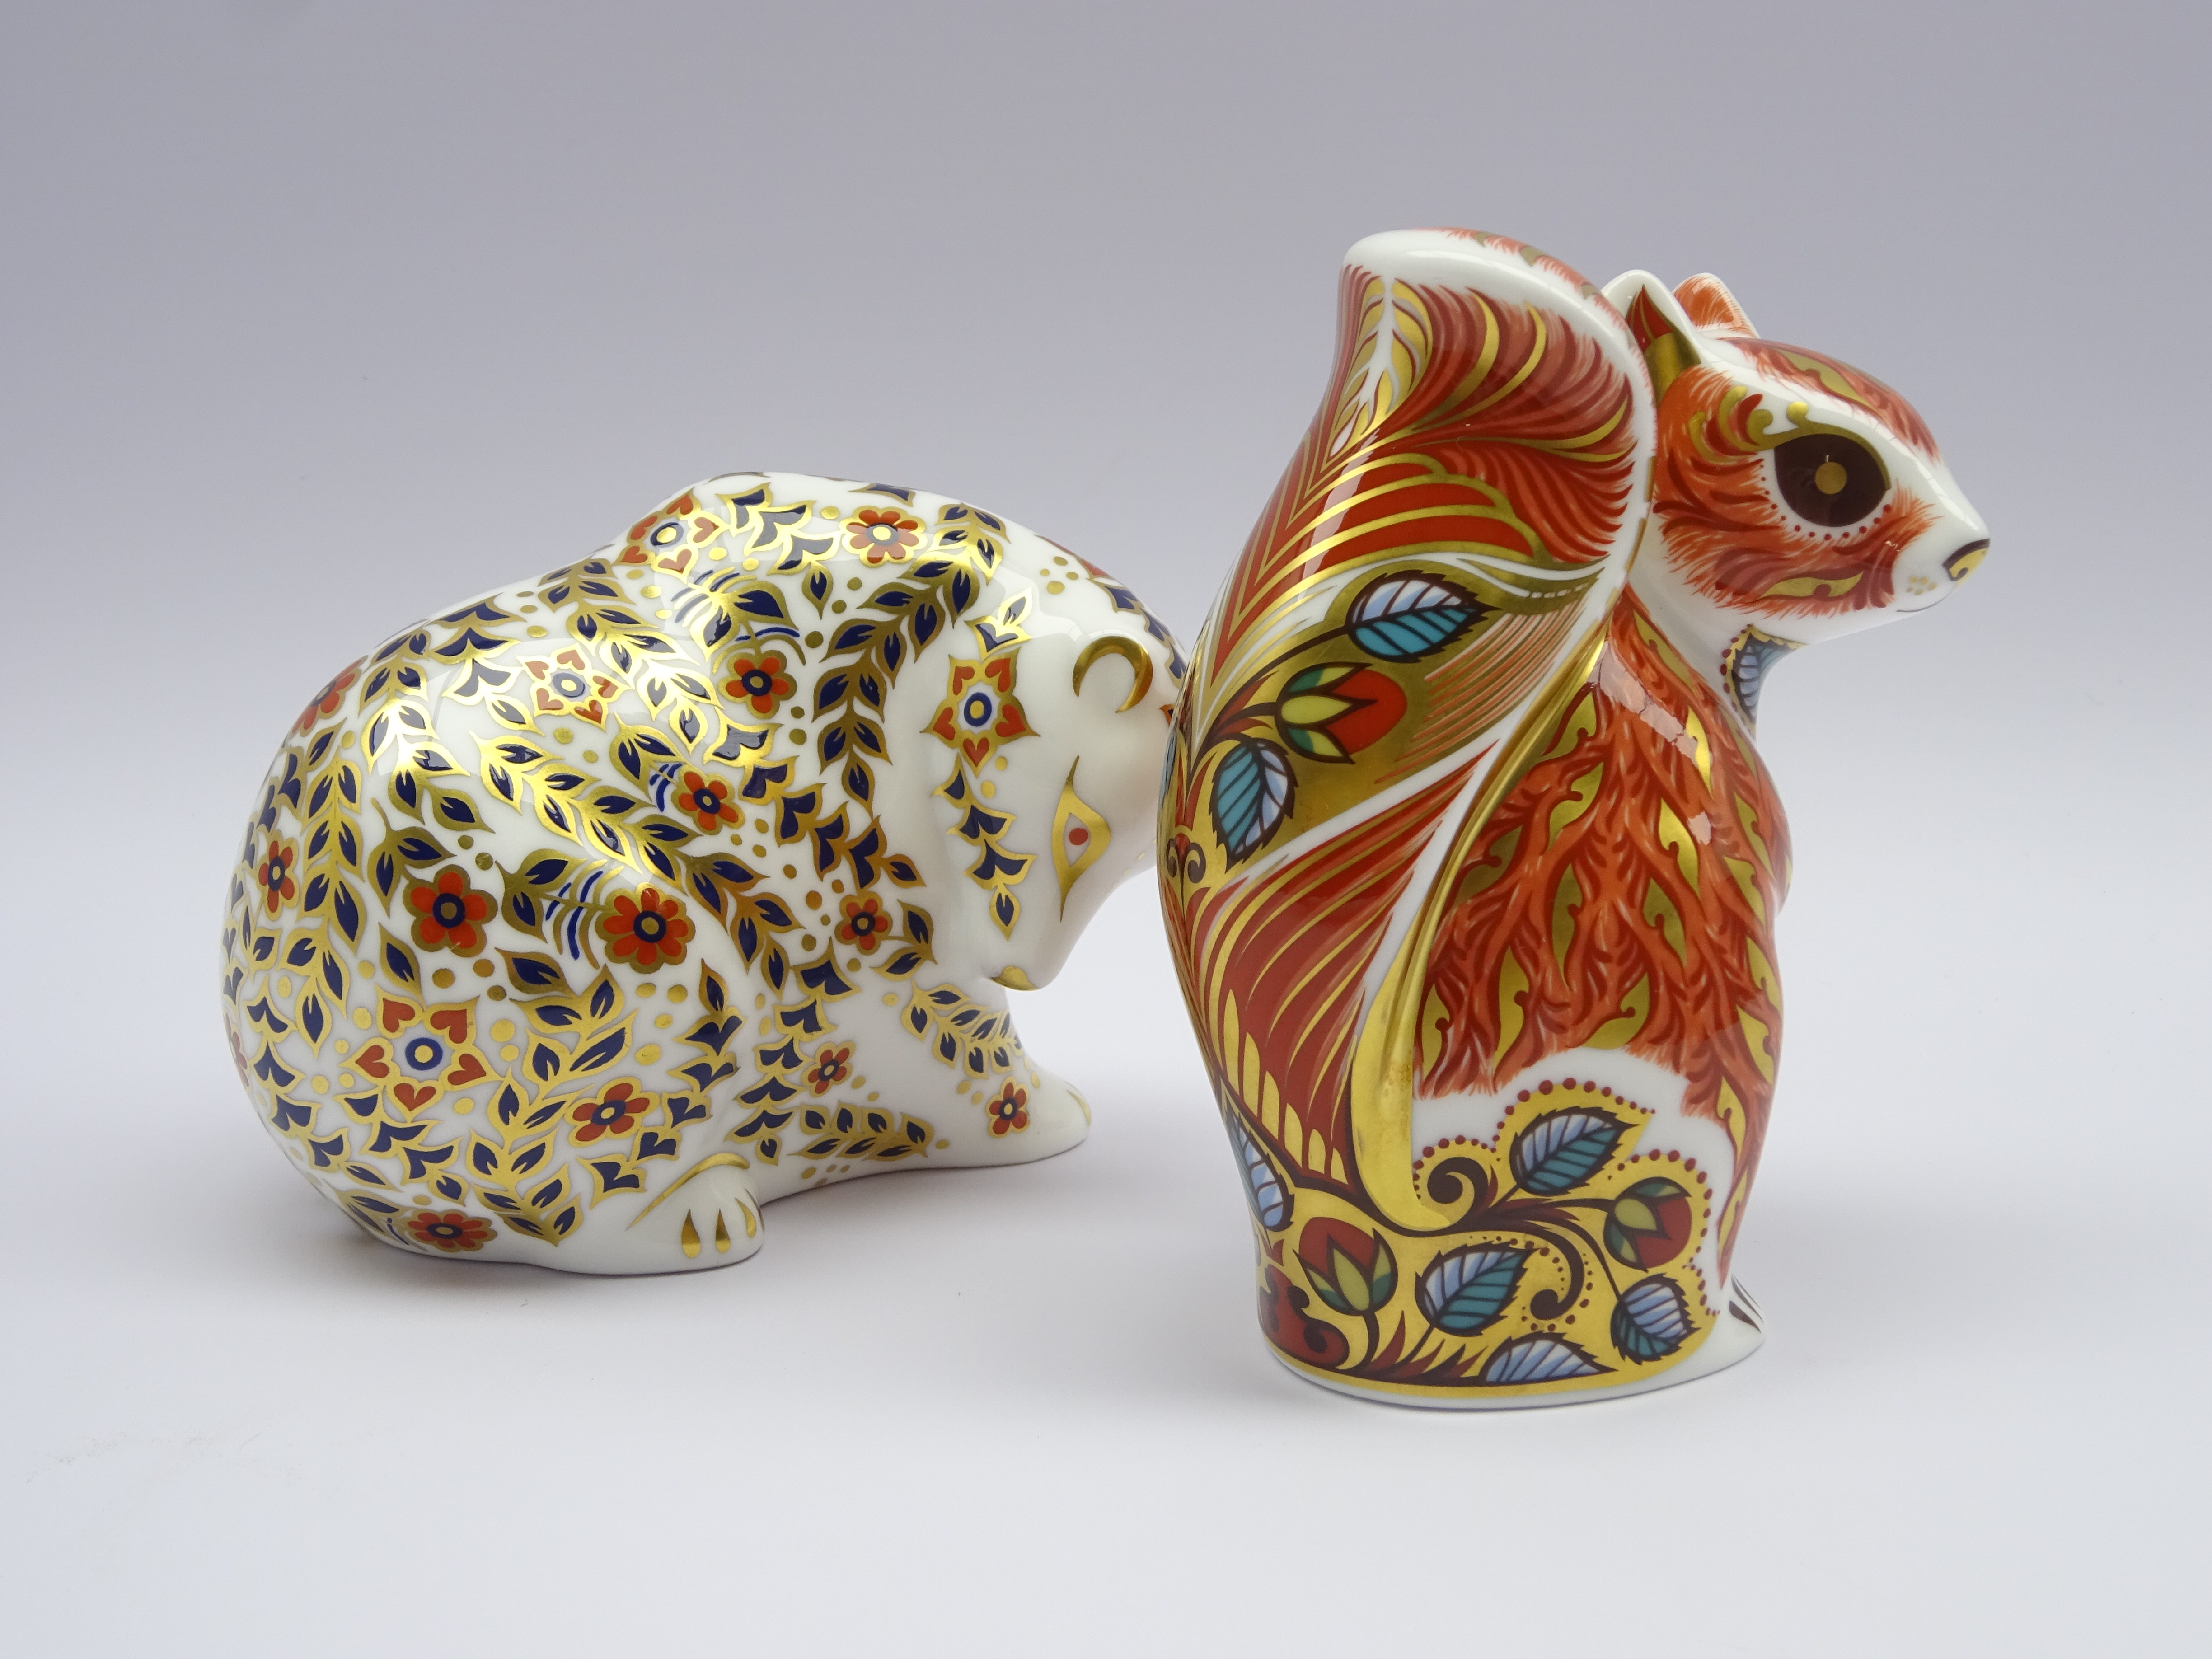 Two Royal Crown Derby paperweights 'Woodland Squirrel' and 'Russian Bear' both with gold stoppers - Image 2 of 2